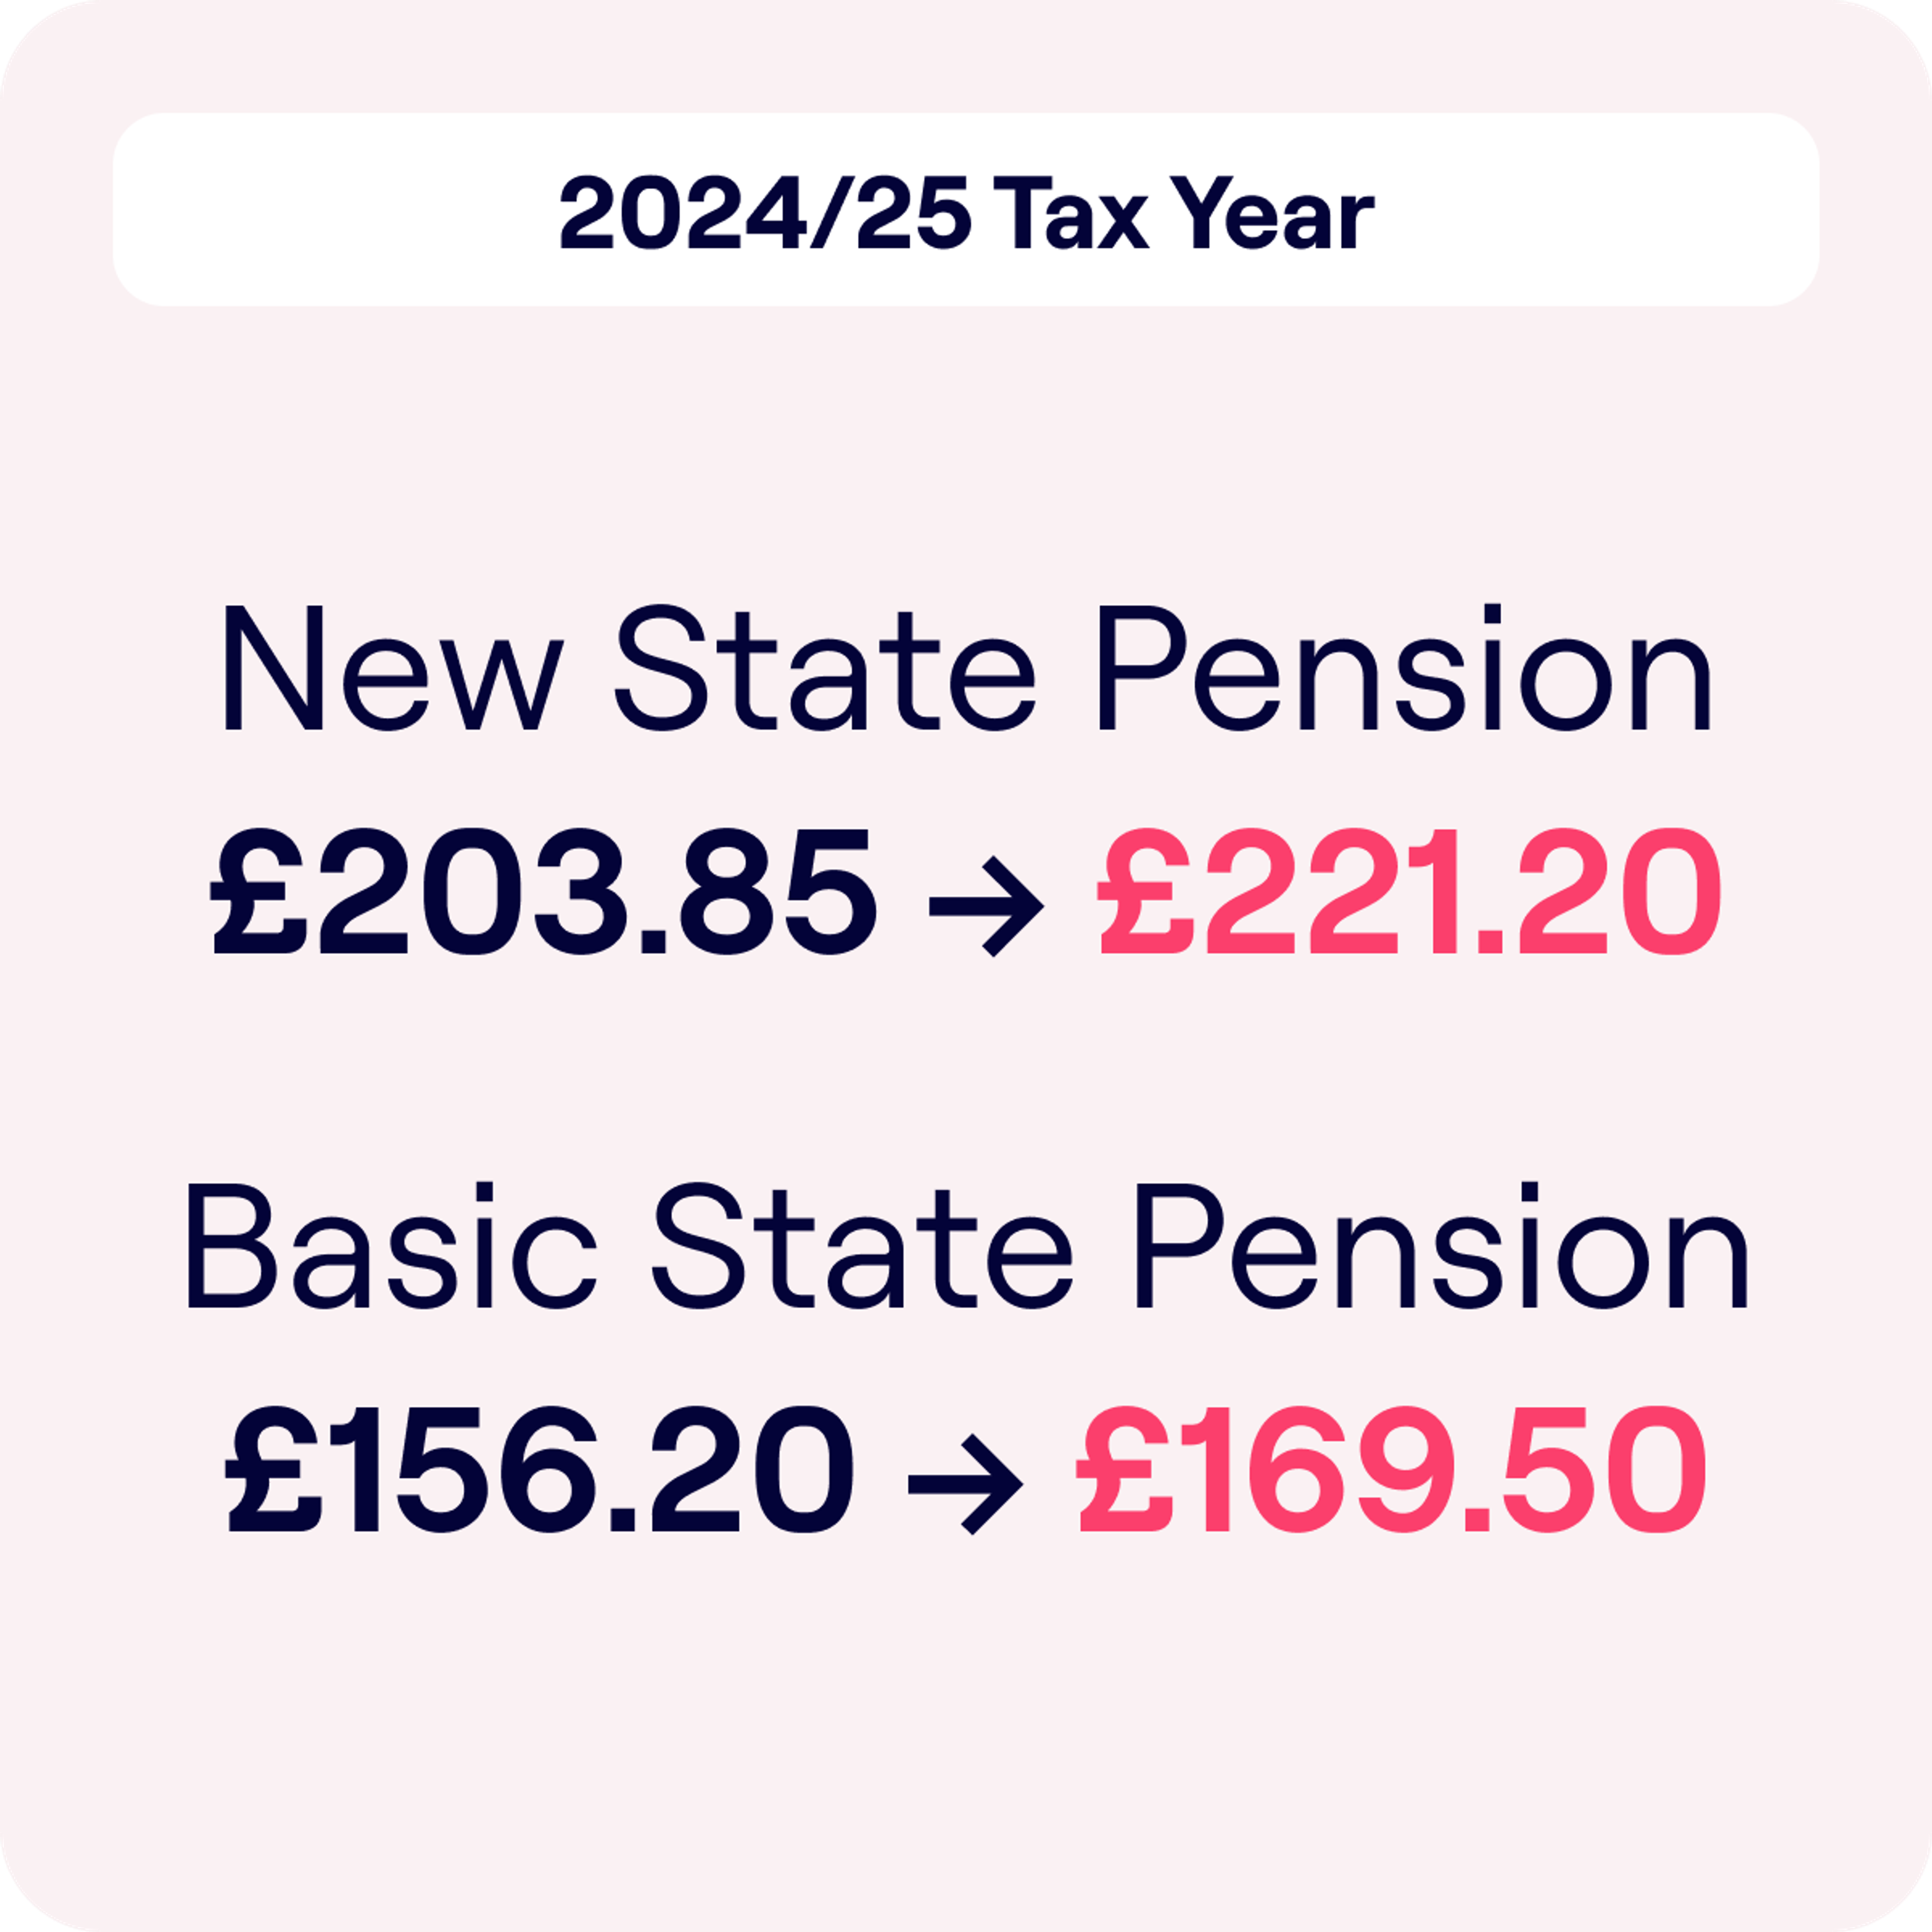 Image detailing updates to state pensions for the 2024/25 Tax Year. It lists an increase in the New State Pension from £203.85 to £221.20 and an increase in the Basic State Pension from £156.20 to £169.50, with the new amounts highlighted in pink.